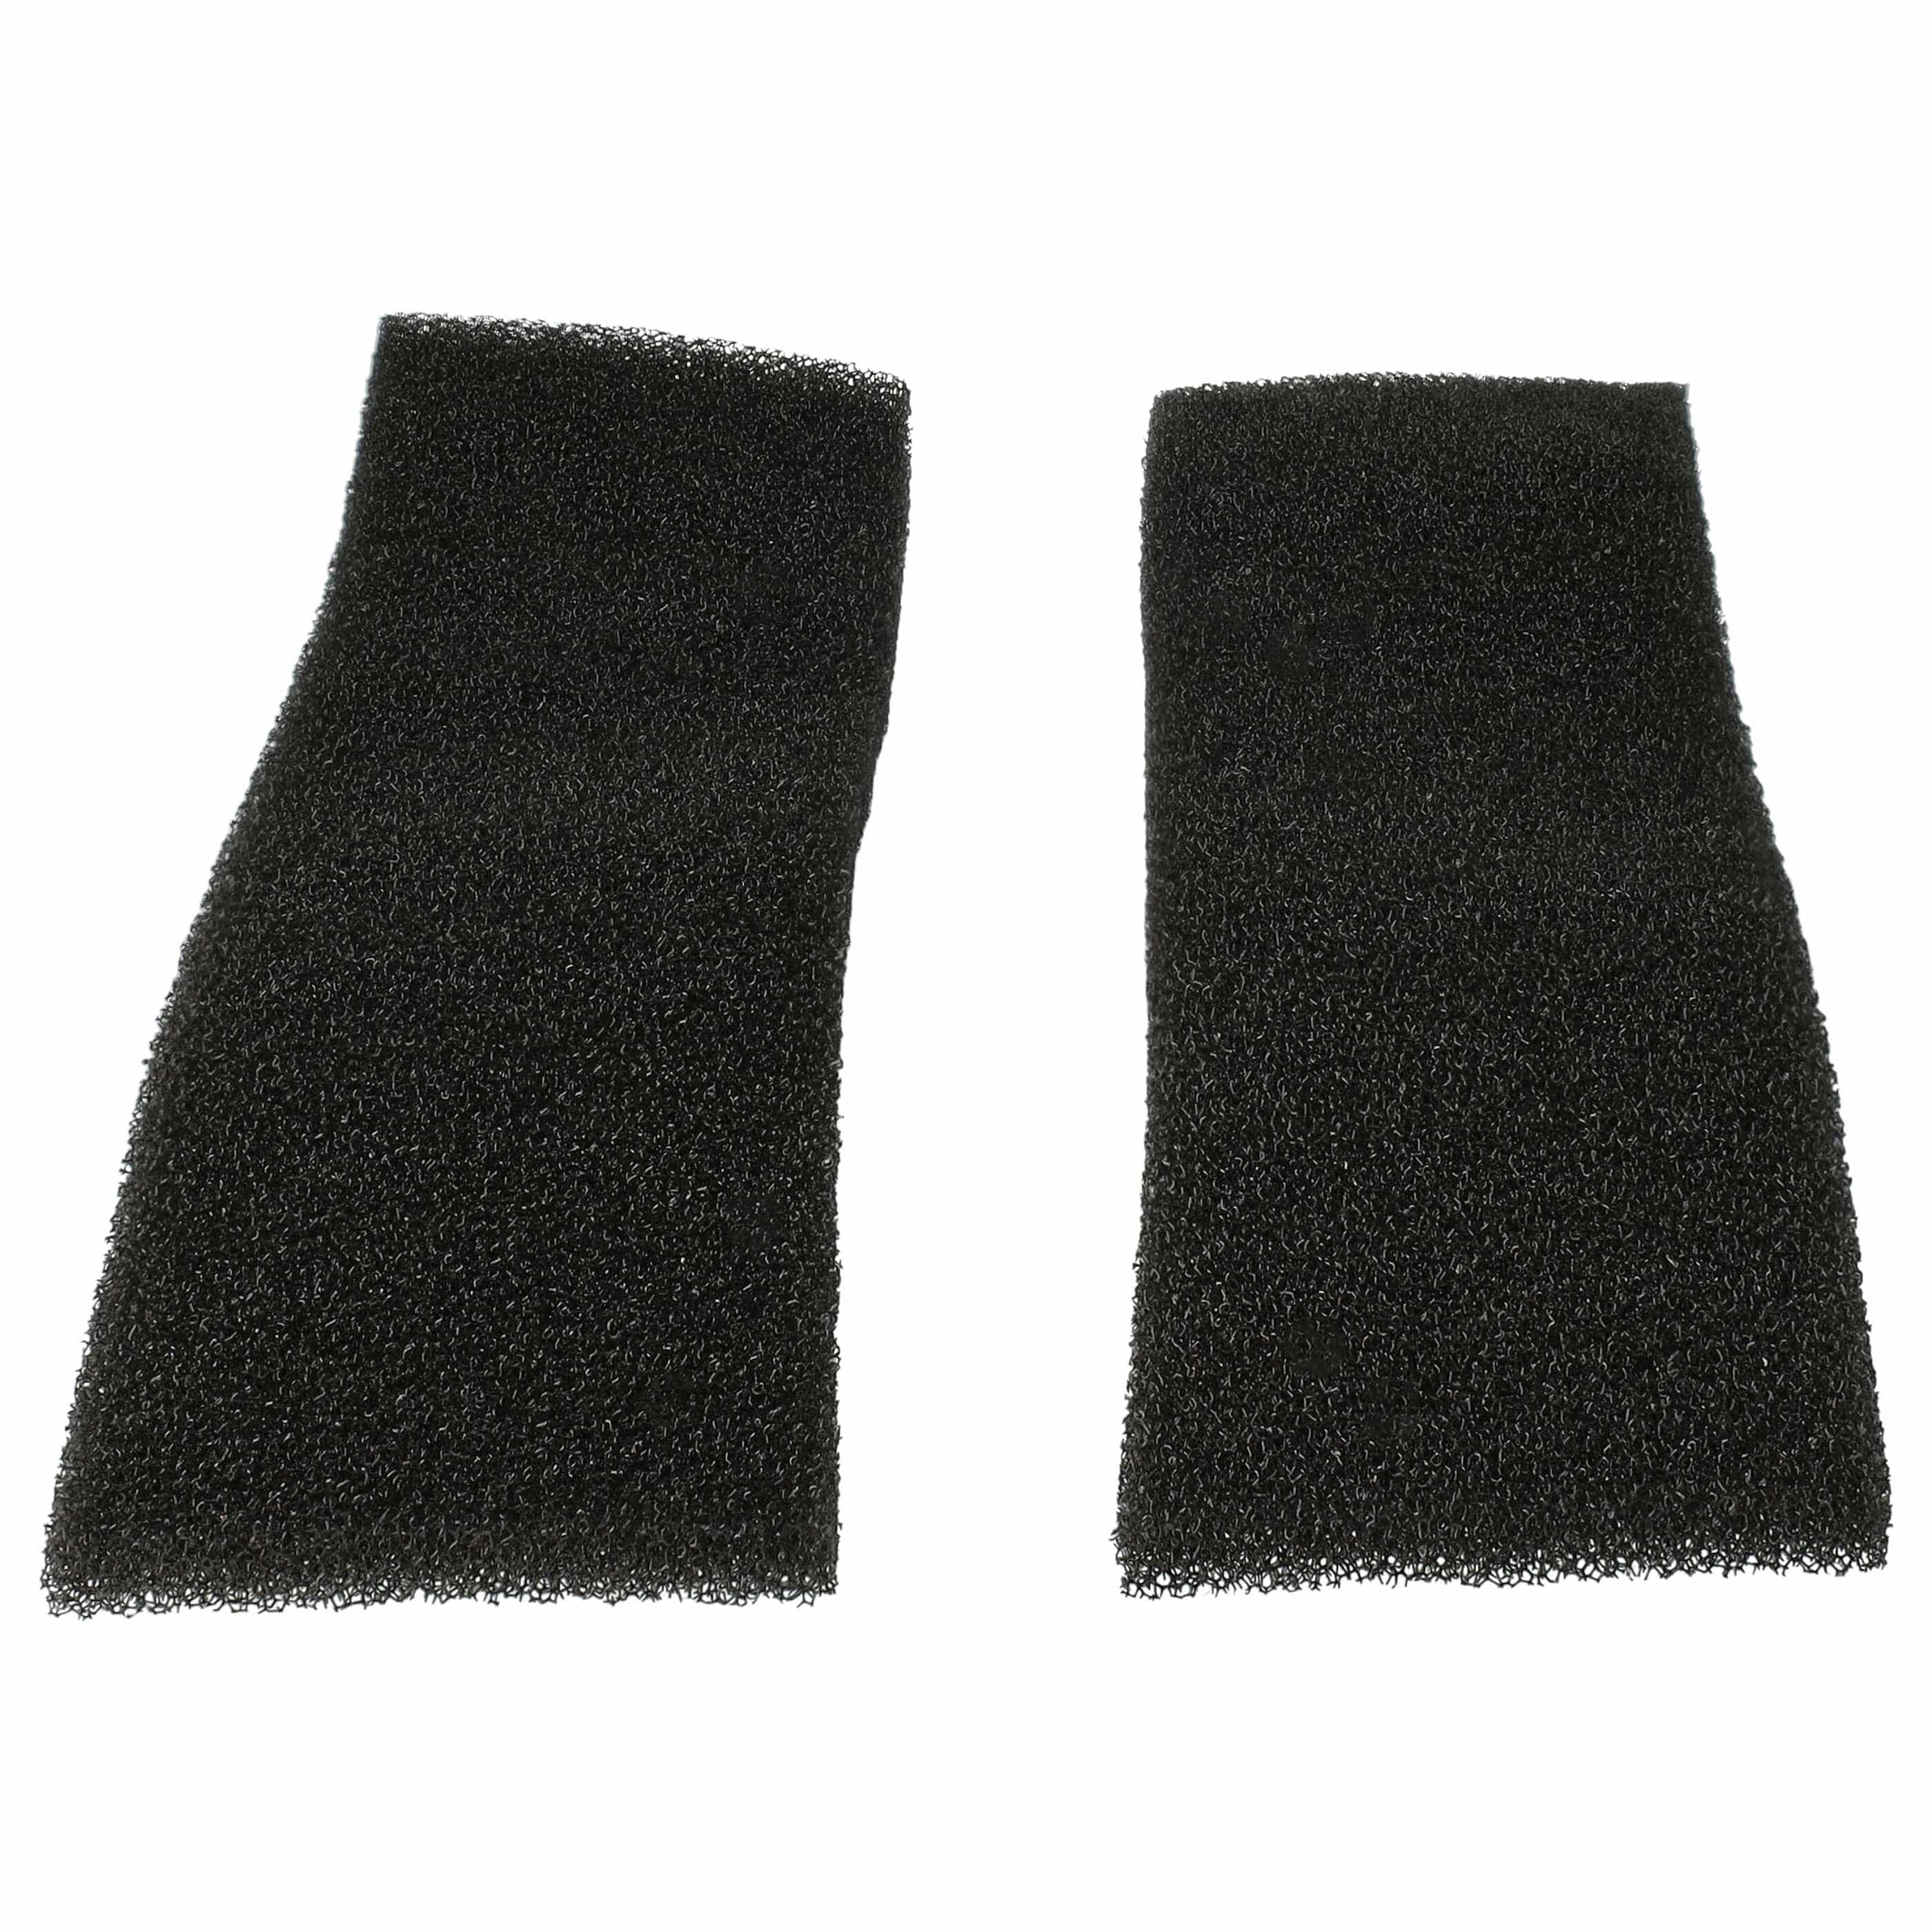 2x Filter for Filling Ring as Replacement for Miele 9688381, 9688380 Tumble Dryer